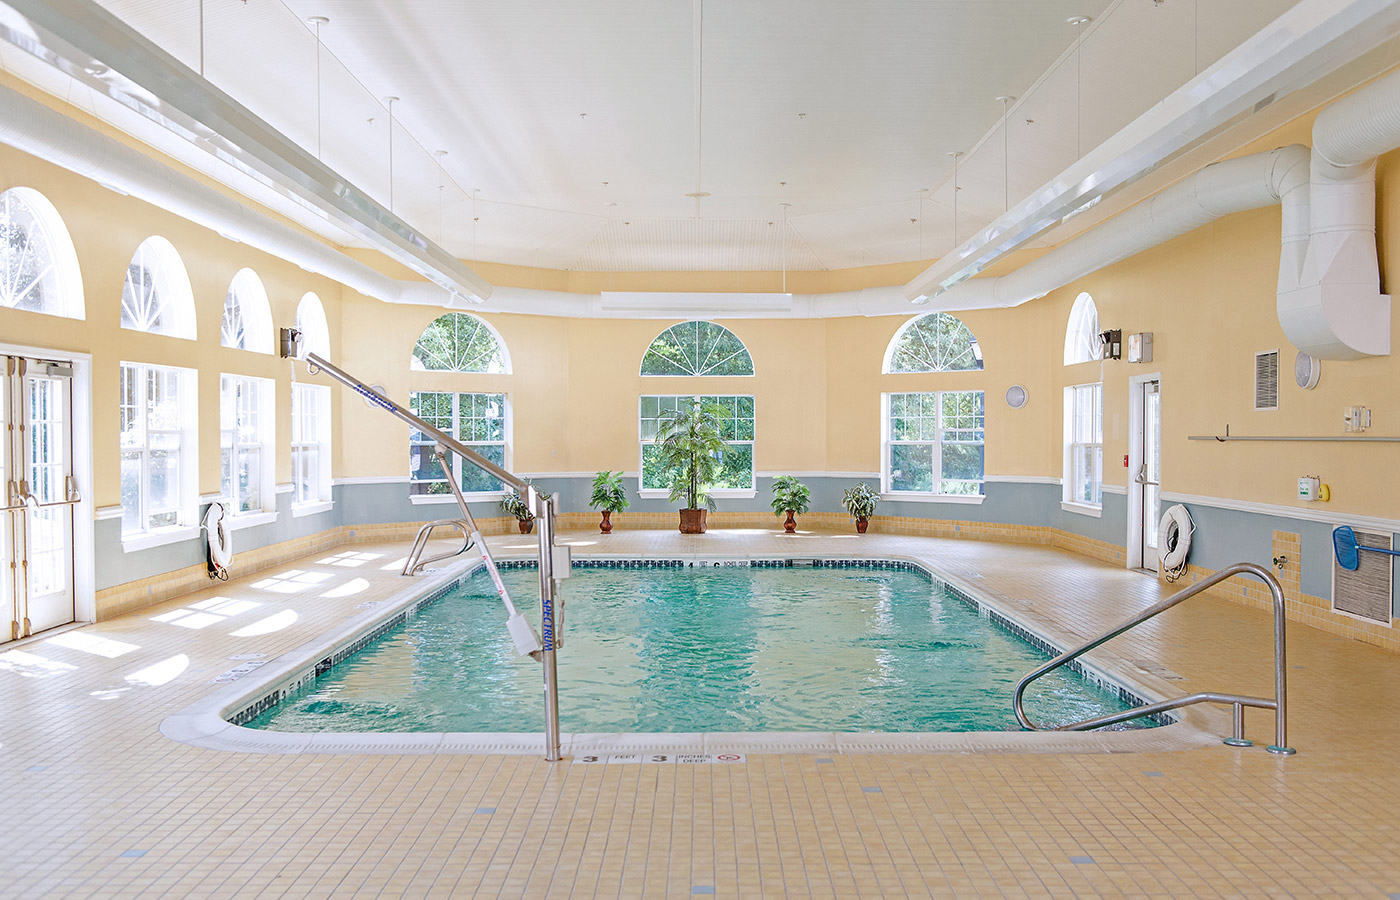 Indoor pool with seating area.